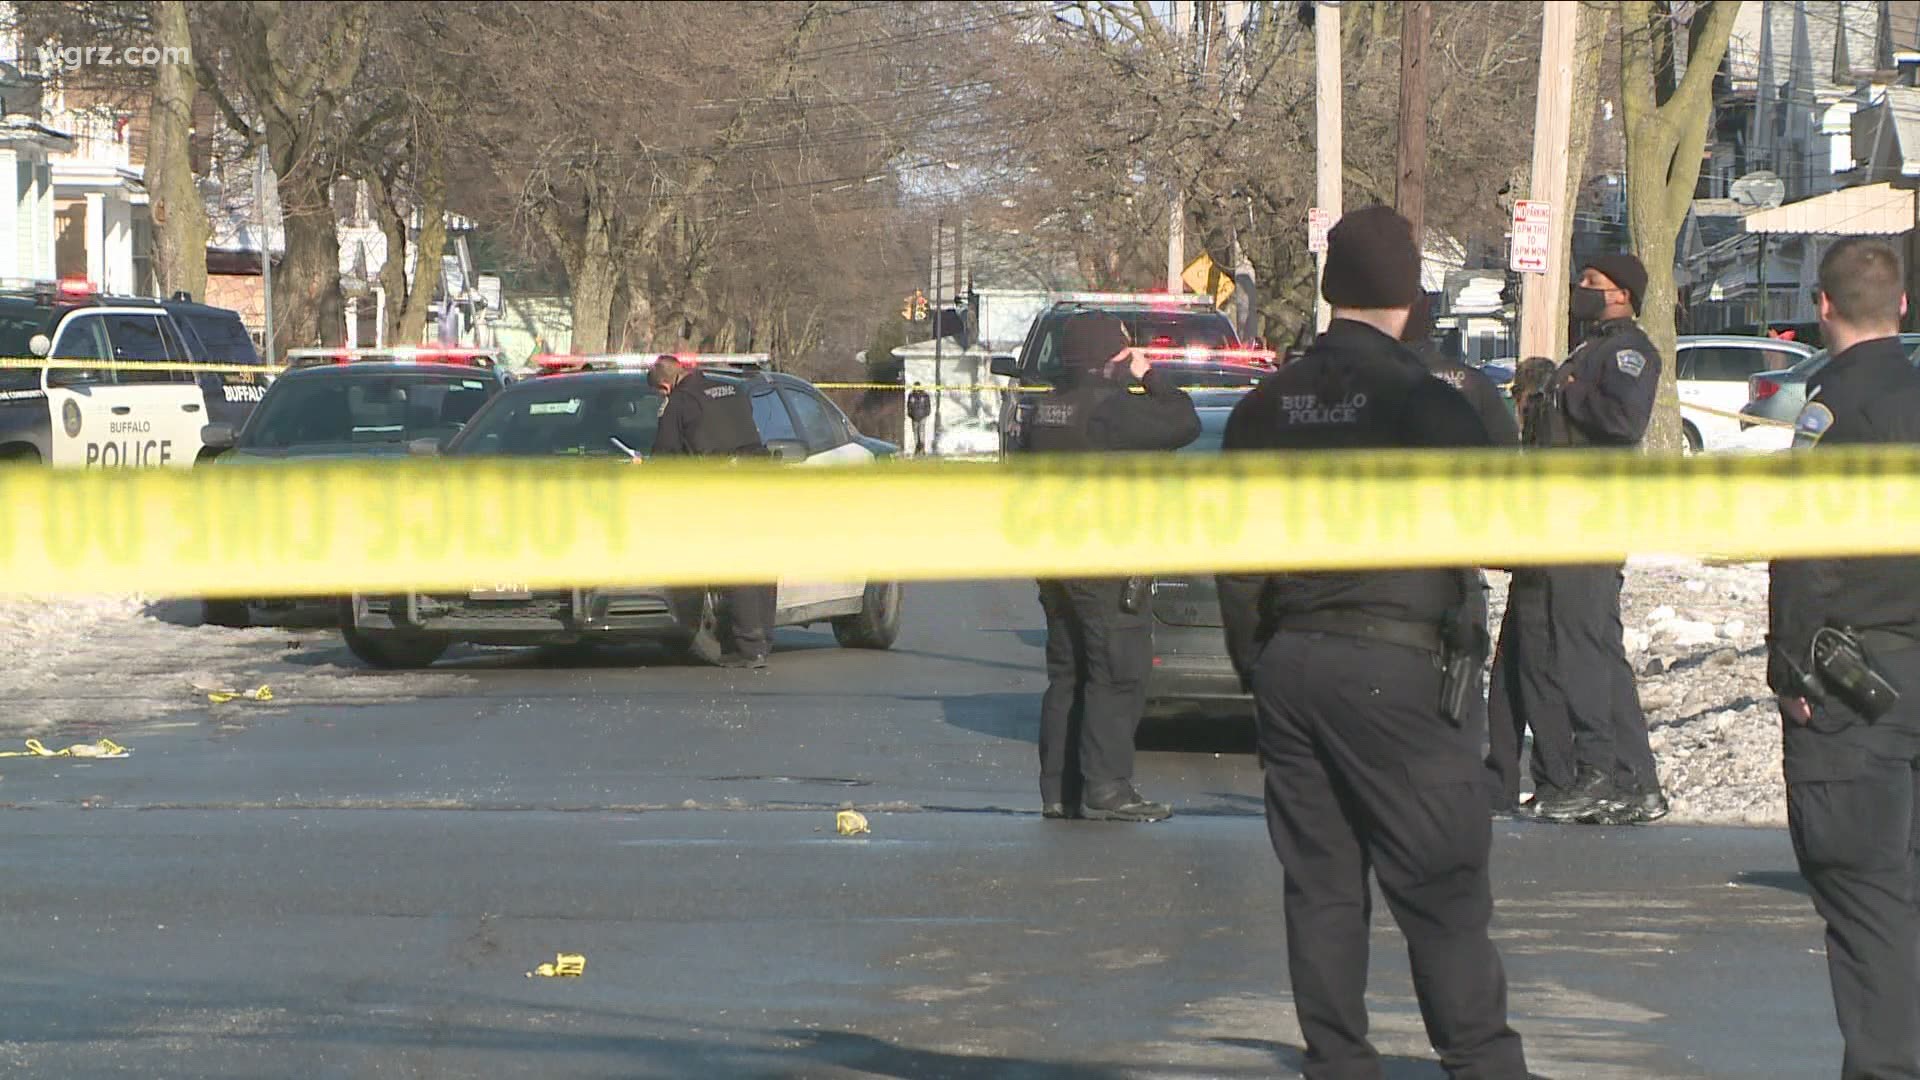 man was shot and seriously hurt around 10:30 this morning near the corner of Schuele and Northland